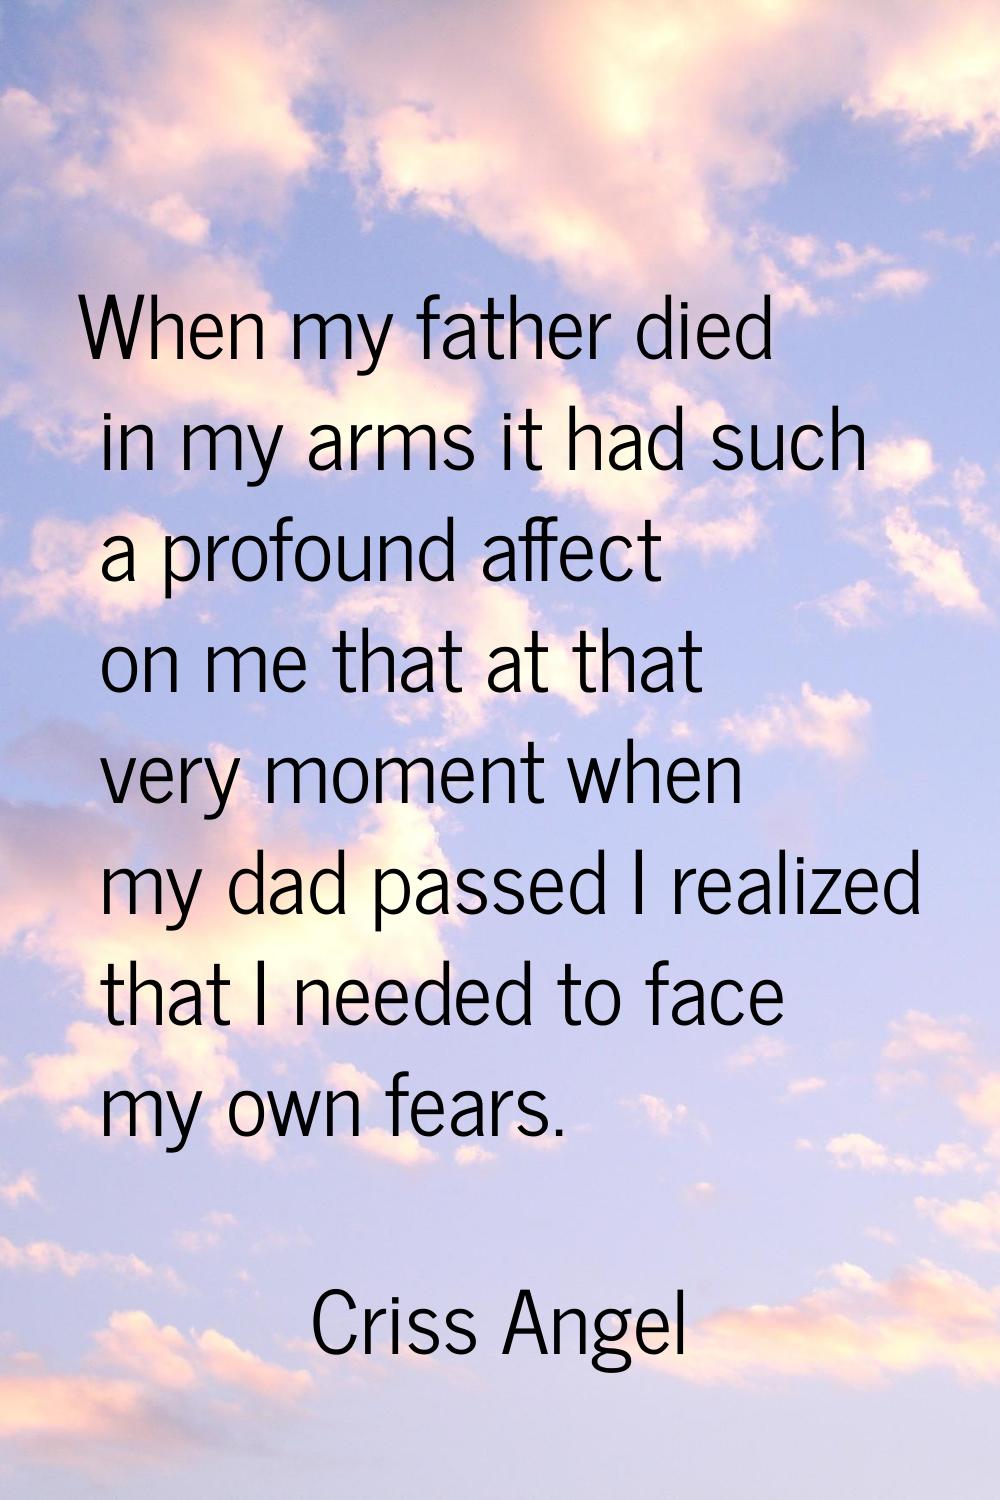 When my father died in my arms it had such a profound affect on me that at that very moment when my